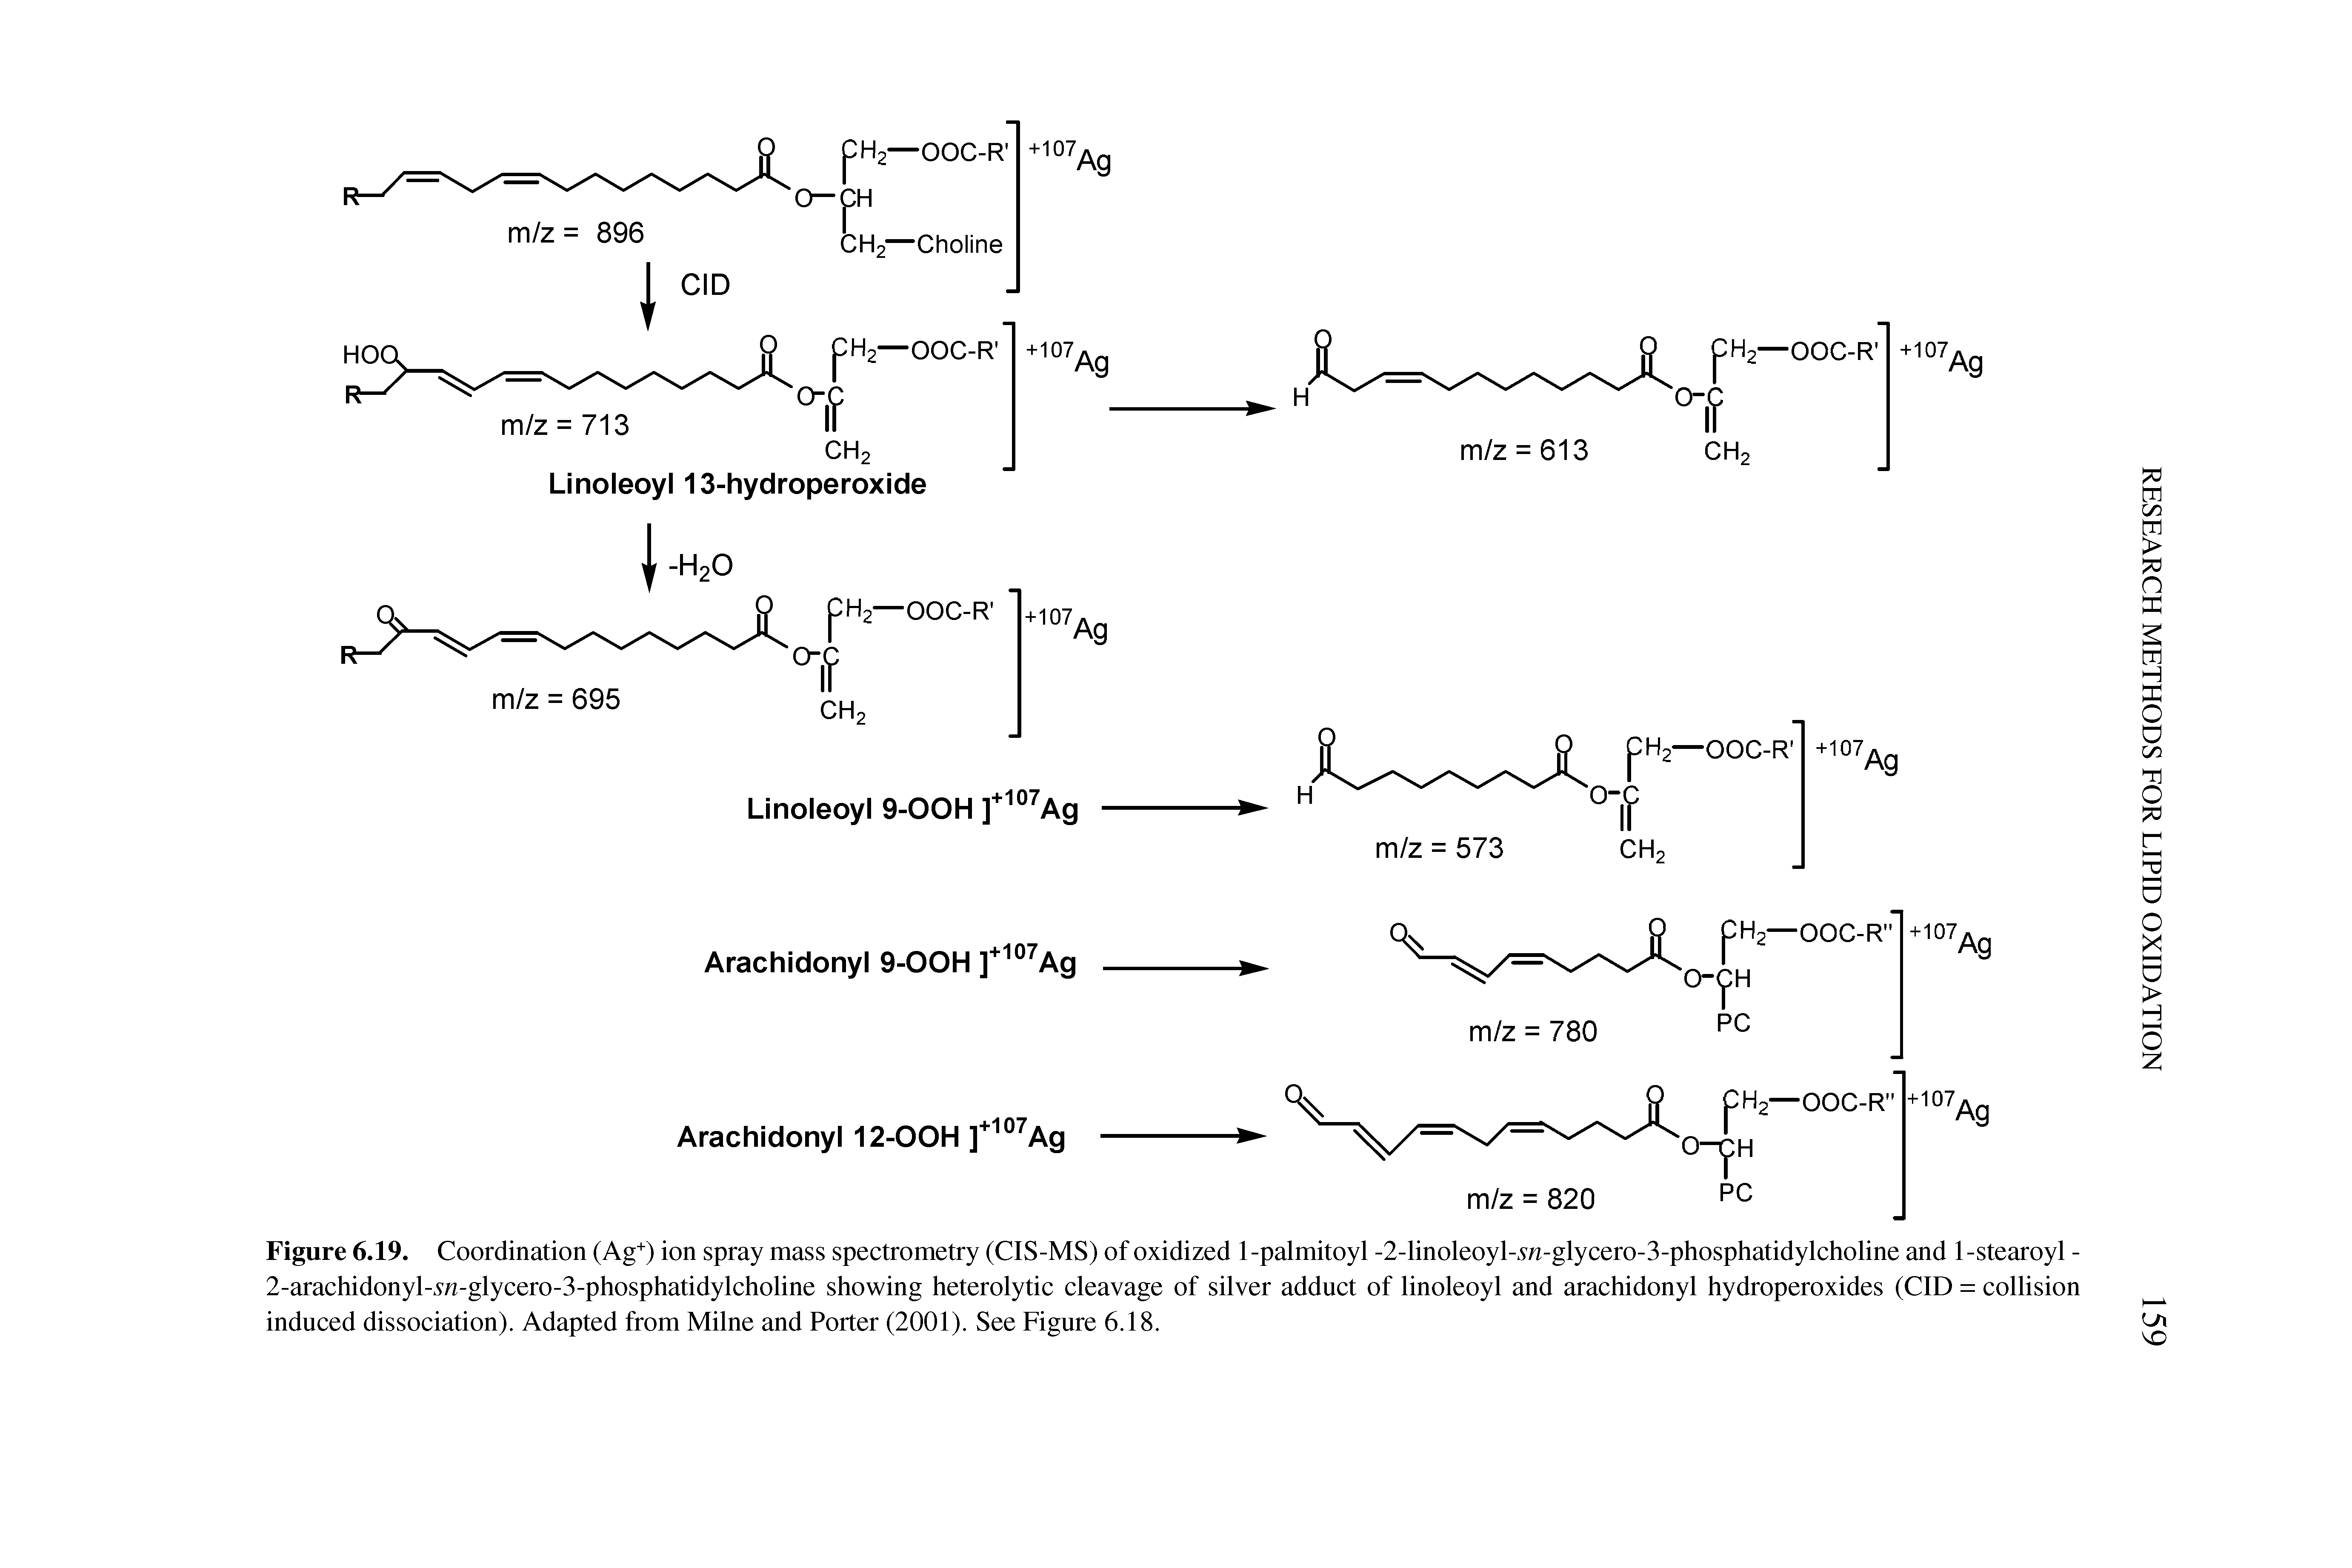 Figure 6.19. Coordination (Ag+) ion spray mass spectrometry (CIS-MS) of oxidized 1-palmitoyl -2-linoleoyl-5n-glycero-3-phosphatidylcholine and 1-stearoyl -2-arachidonyl-5n-glycero-3-phosphatidylcholine showing heterolytic cleavage of silver adduct of linoleoyl and arachidonyl hydroperoxides (CID = collision induced dissociation). Adapted from Milne and Porter (2001). See Figure 6.18.